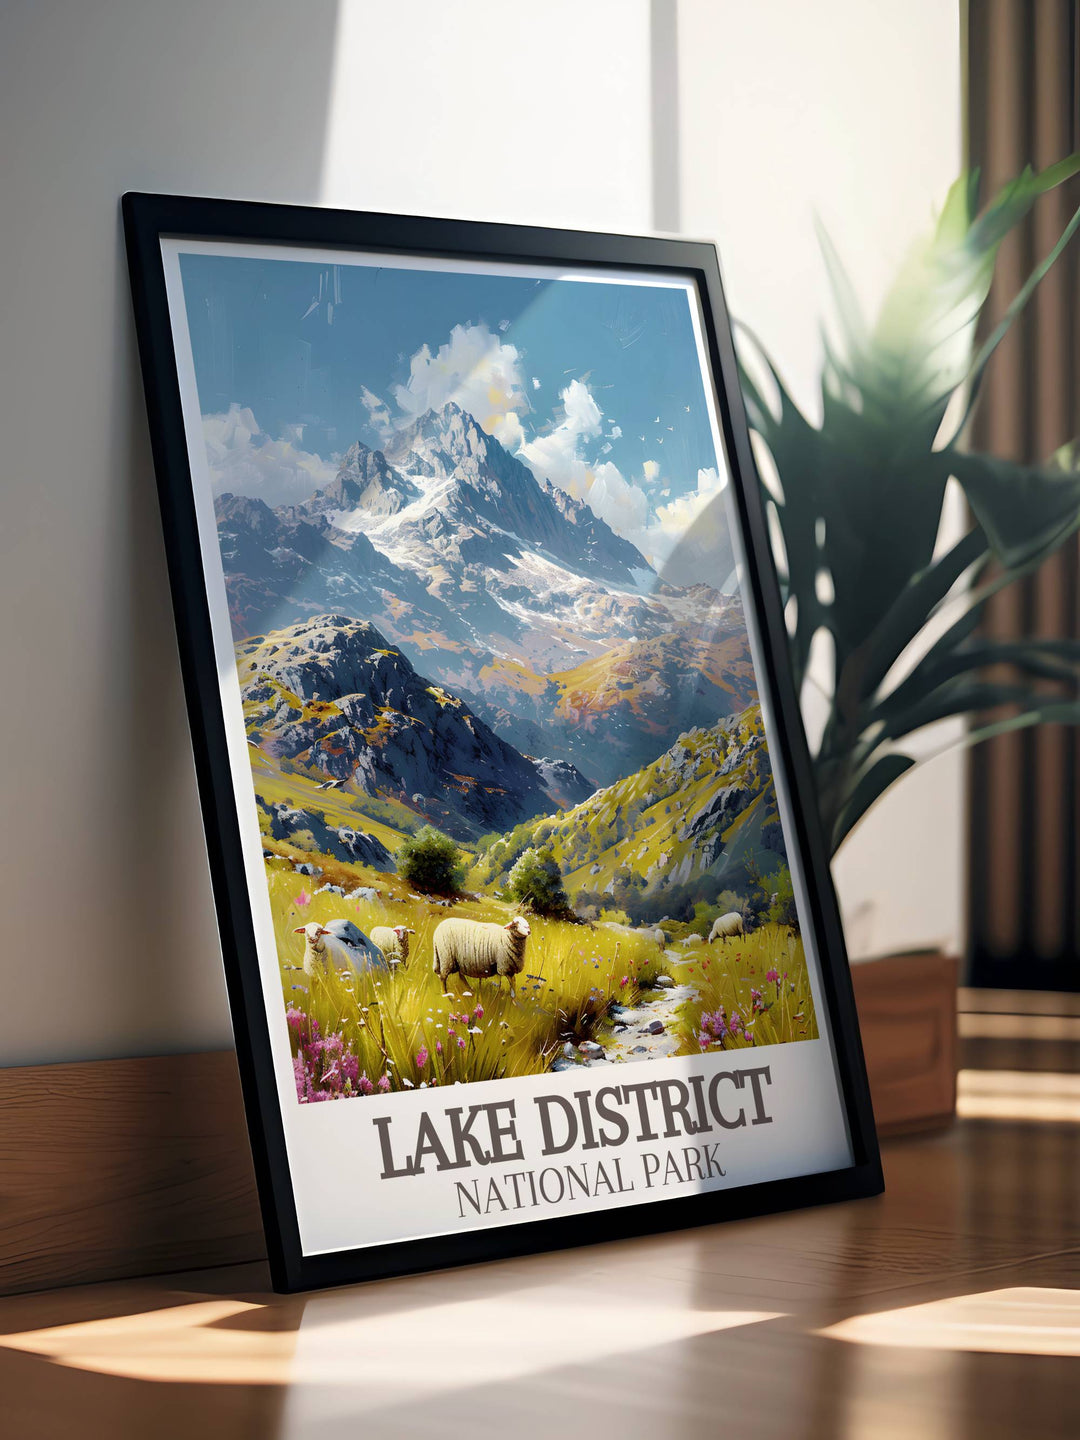 National Park print featuring the iconic views and natural wonders of the Lake District, suited for enthusiasts of British national parks.